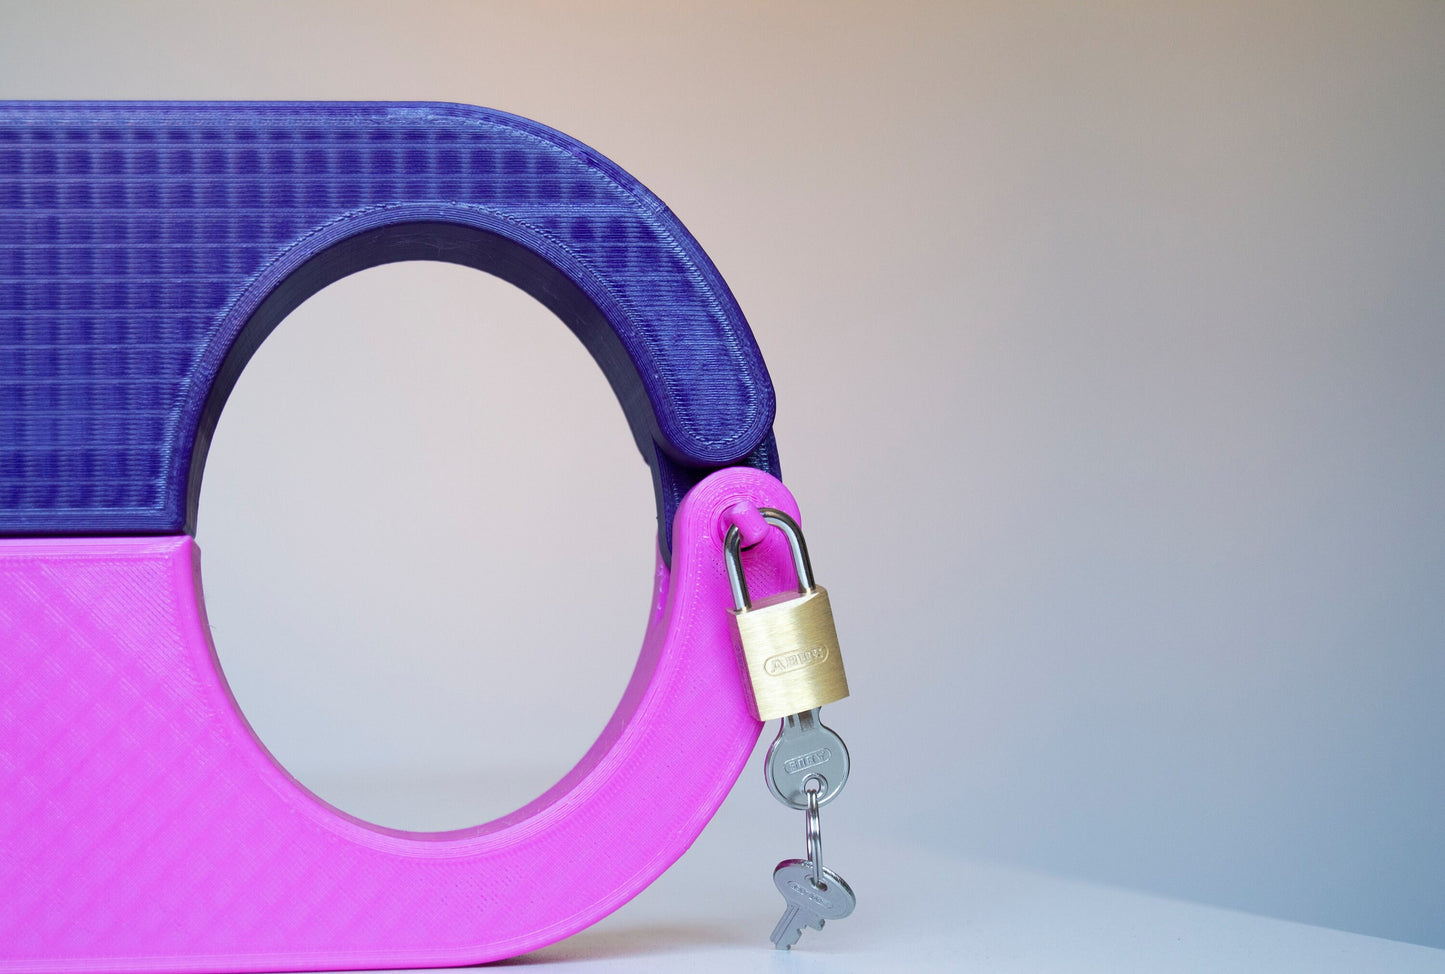 3d printed purple and pink pillory